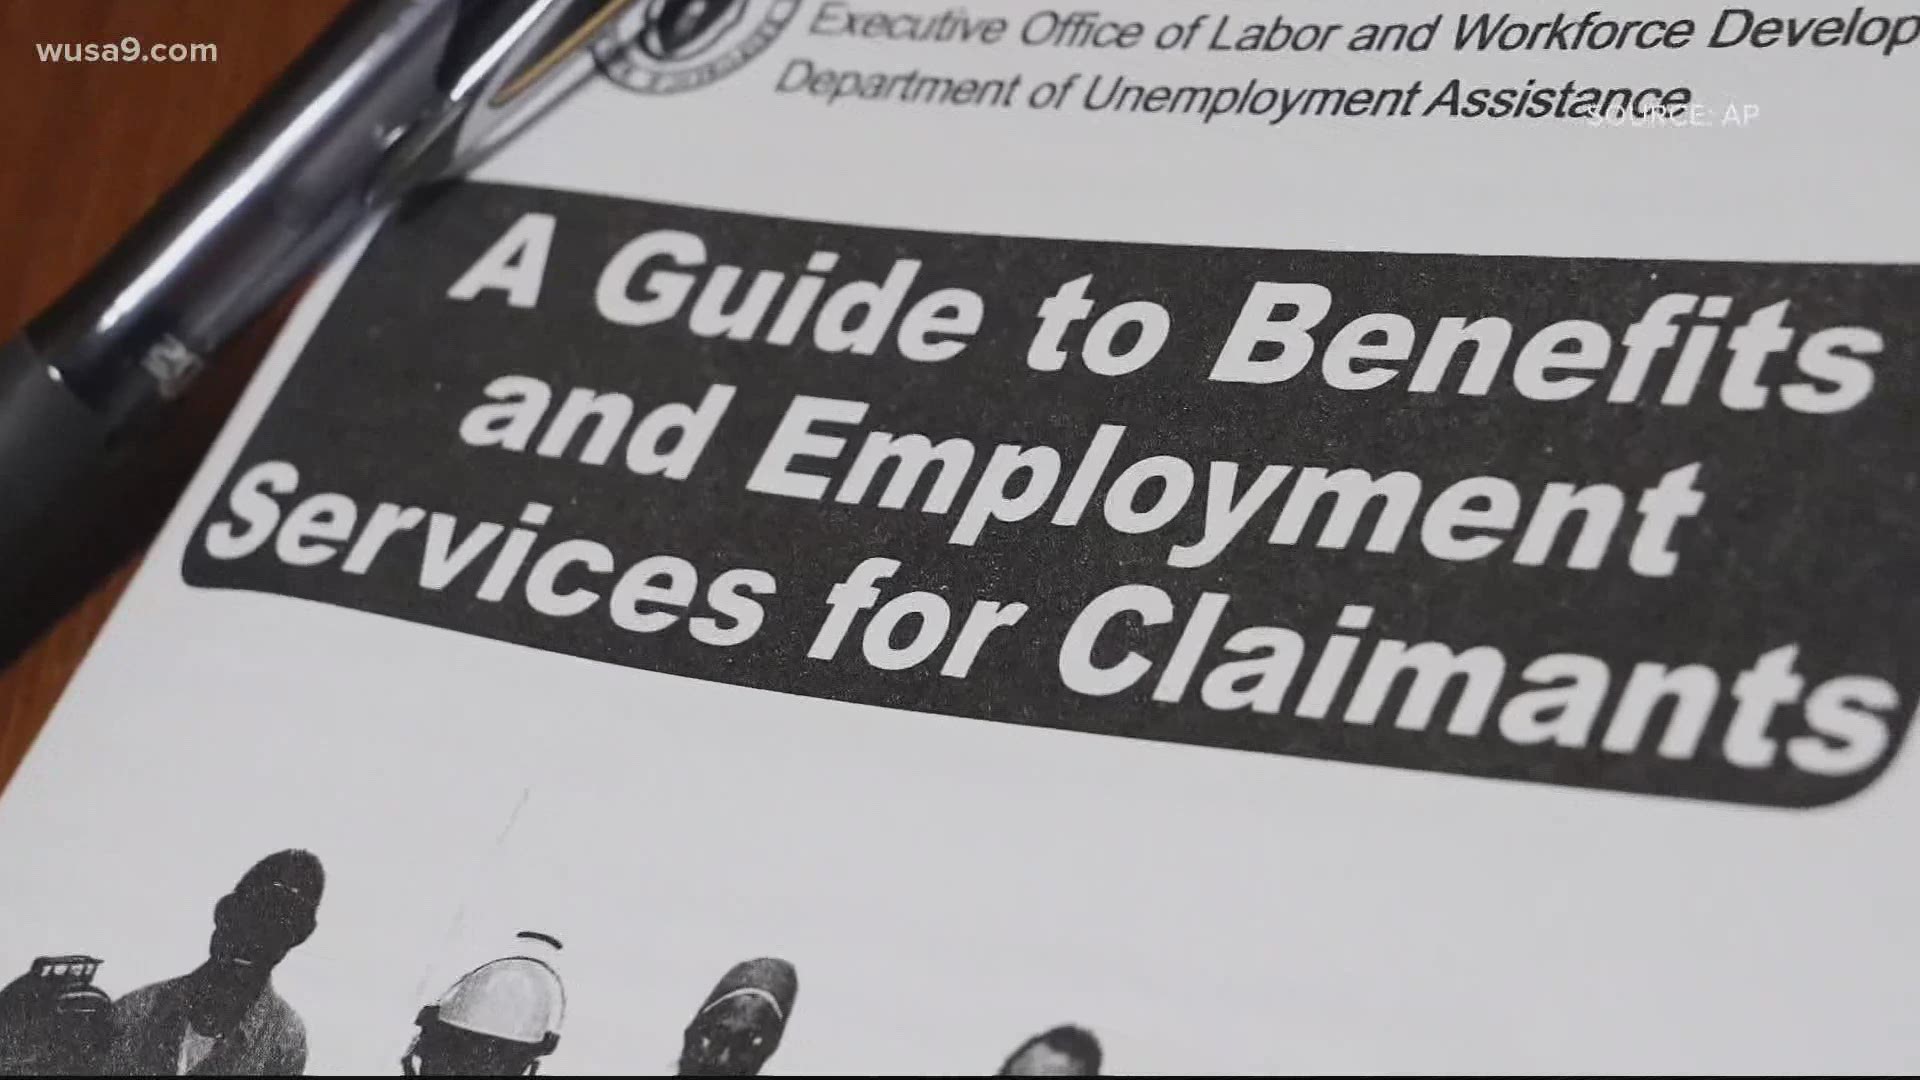 The Legal Aid Society of D.C. said Saturday that more than 75,000 people could lose unemployment benefits due to the delay in passing the pandemic relief package.